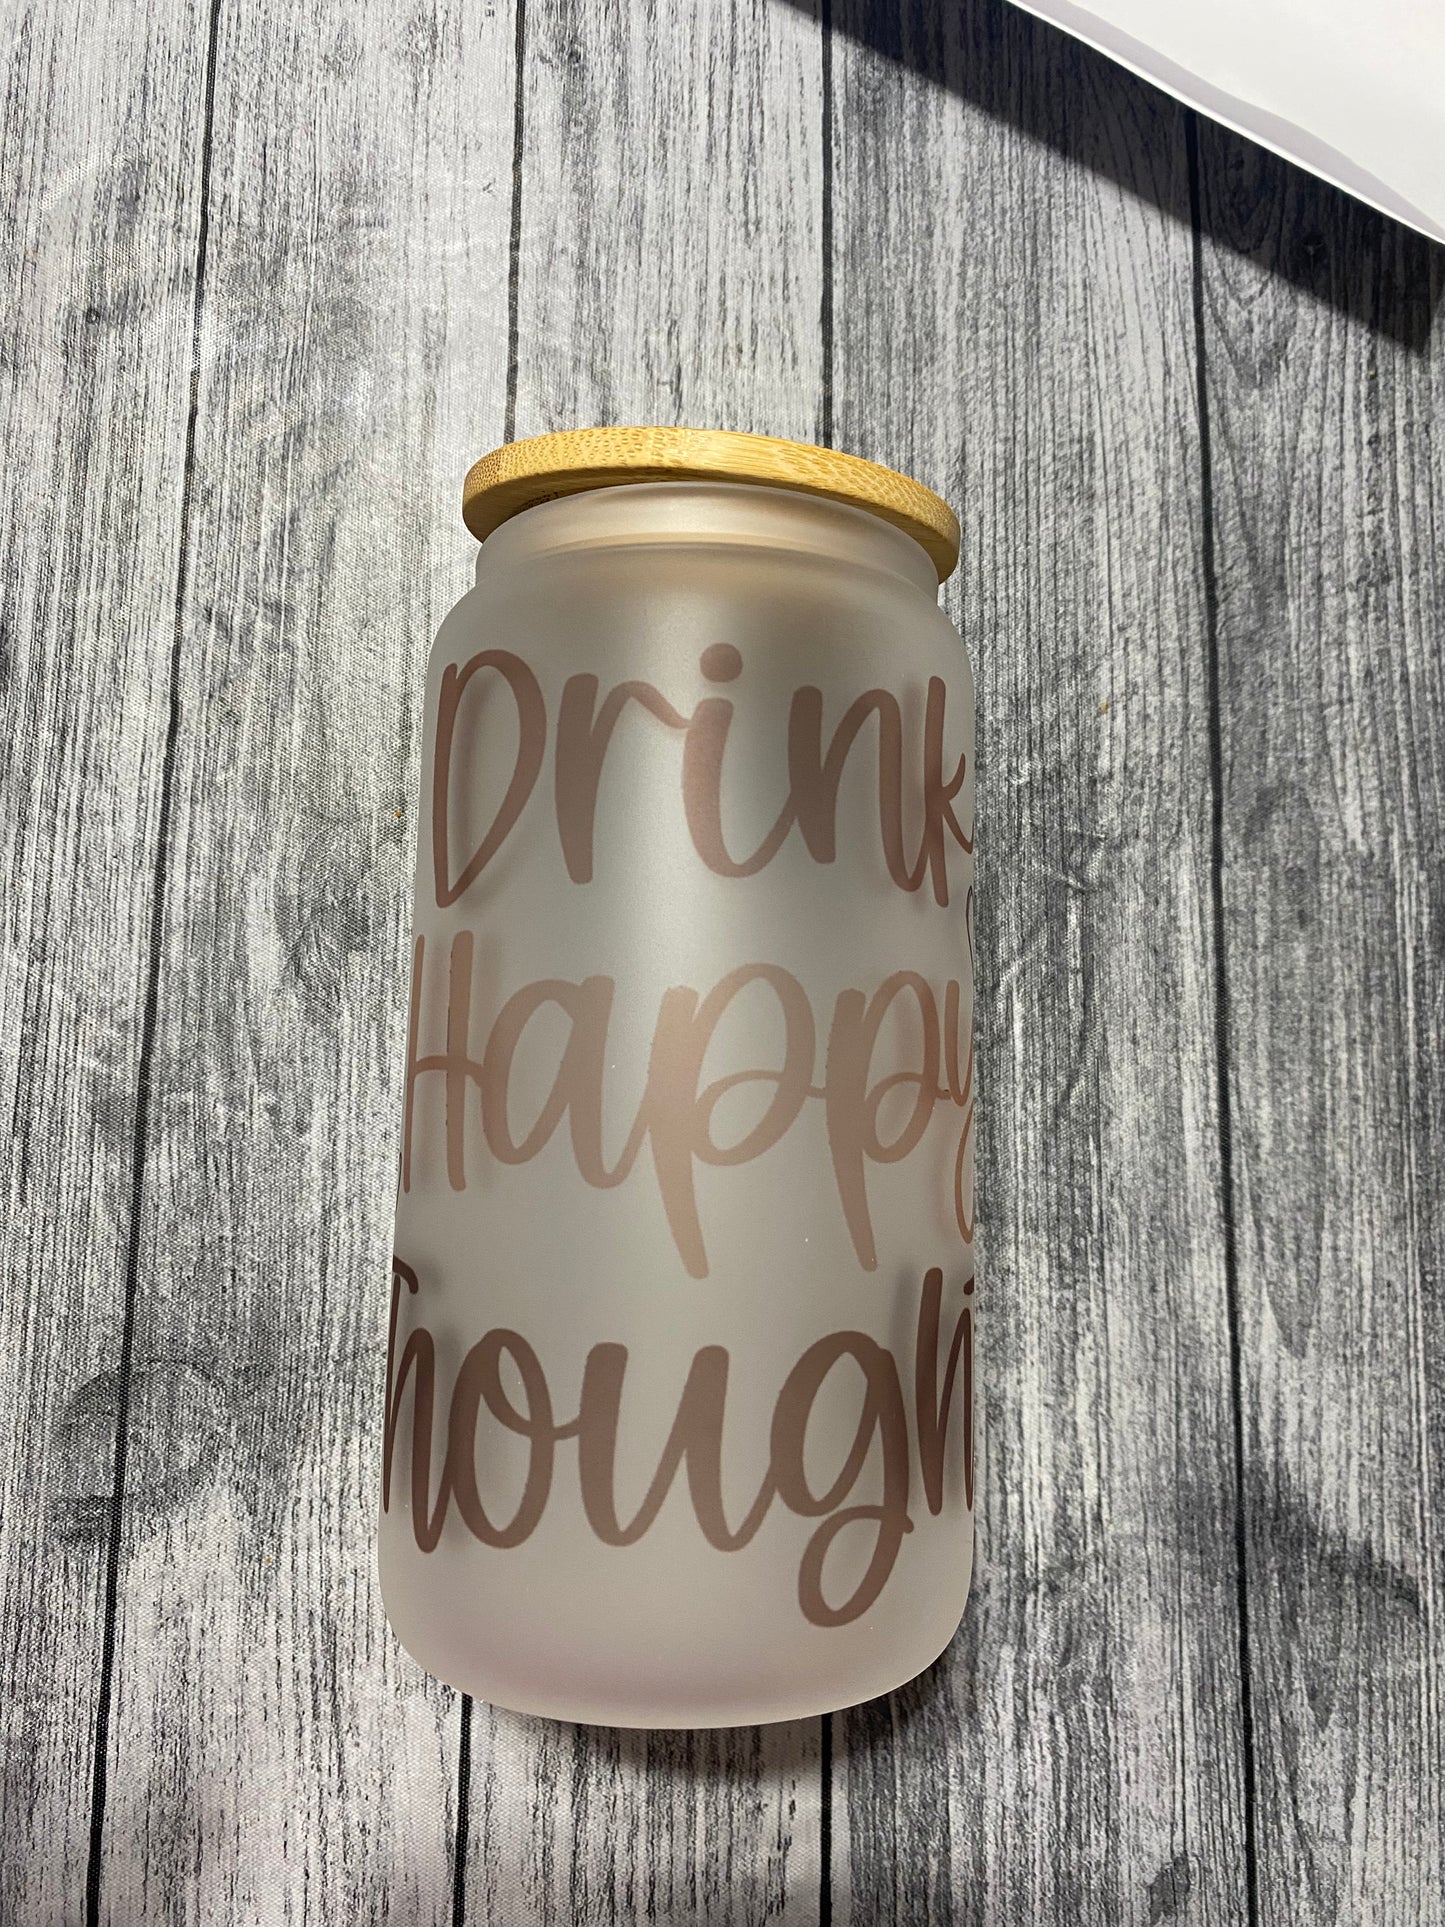 Drink Happy Thoughts